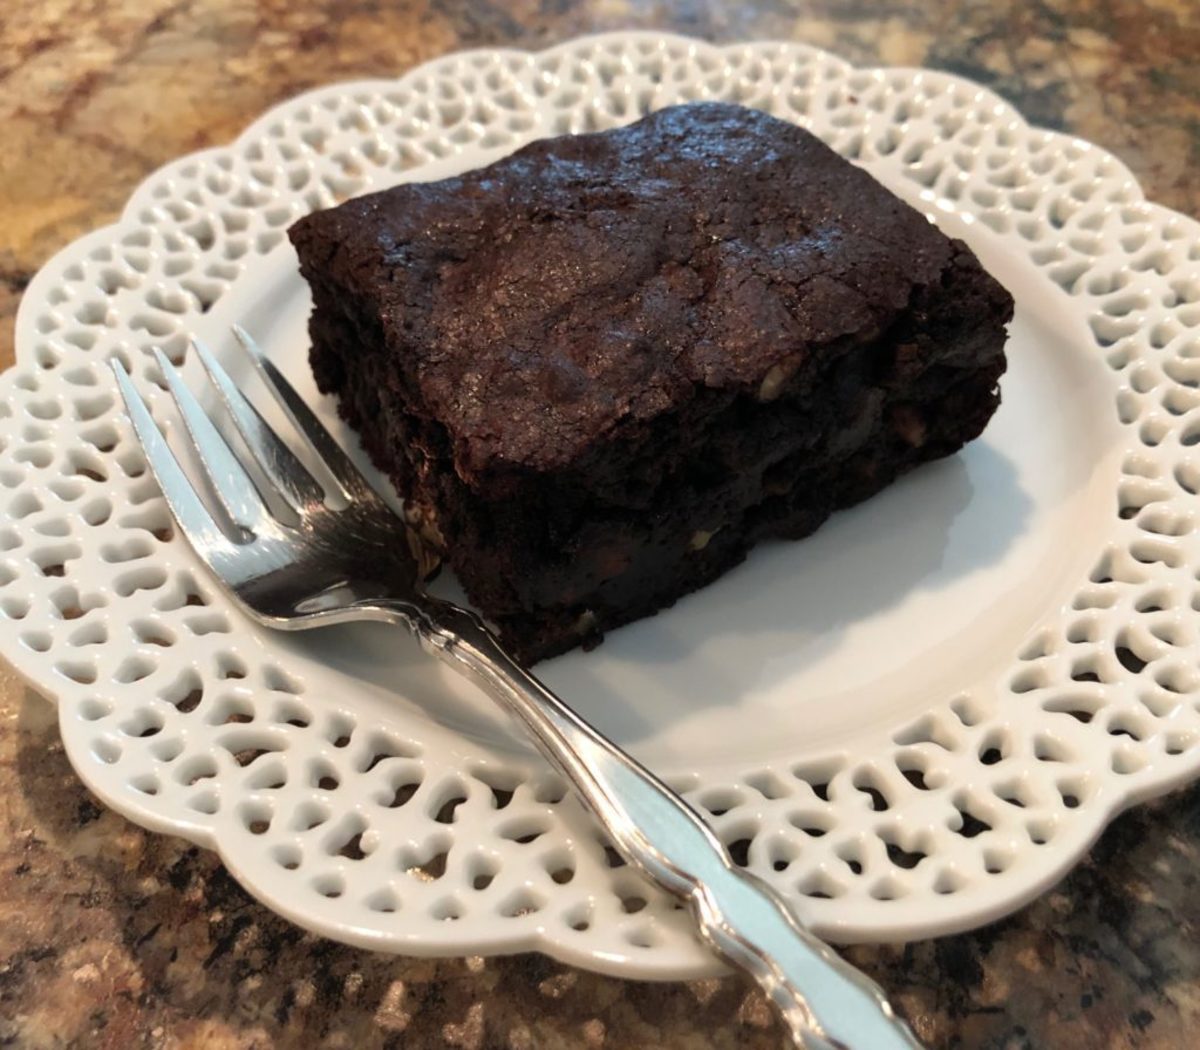 Bo's delicious gluten-free brownies with pecans. (You can make these brownies with regular flour, if you prefer.)